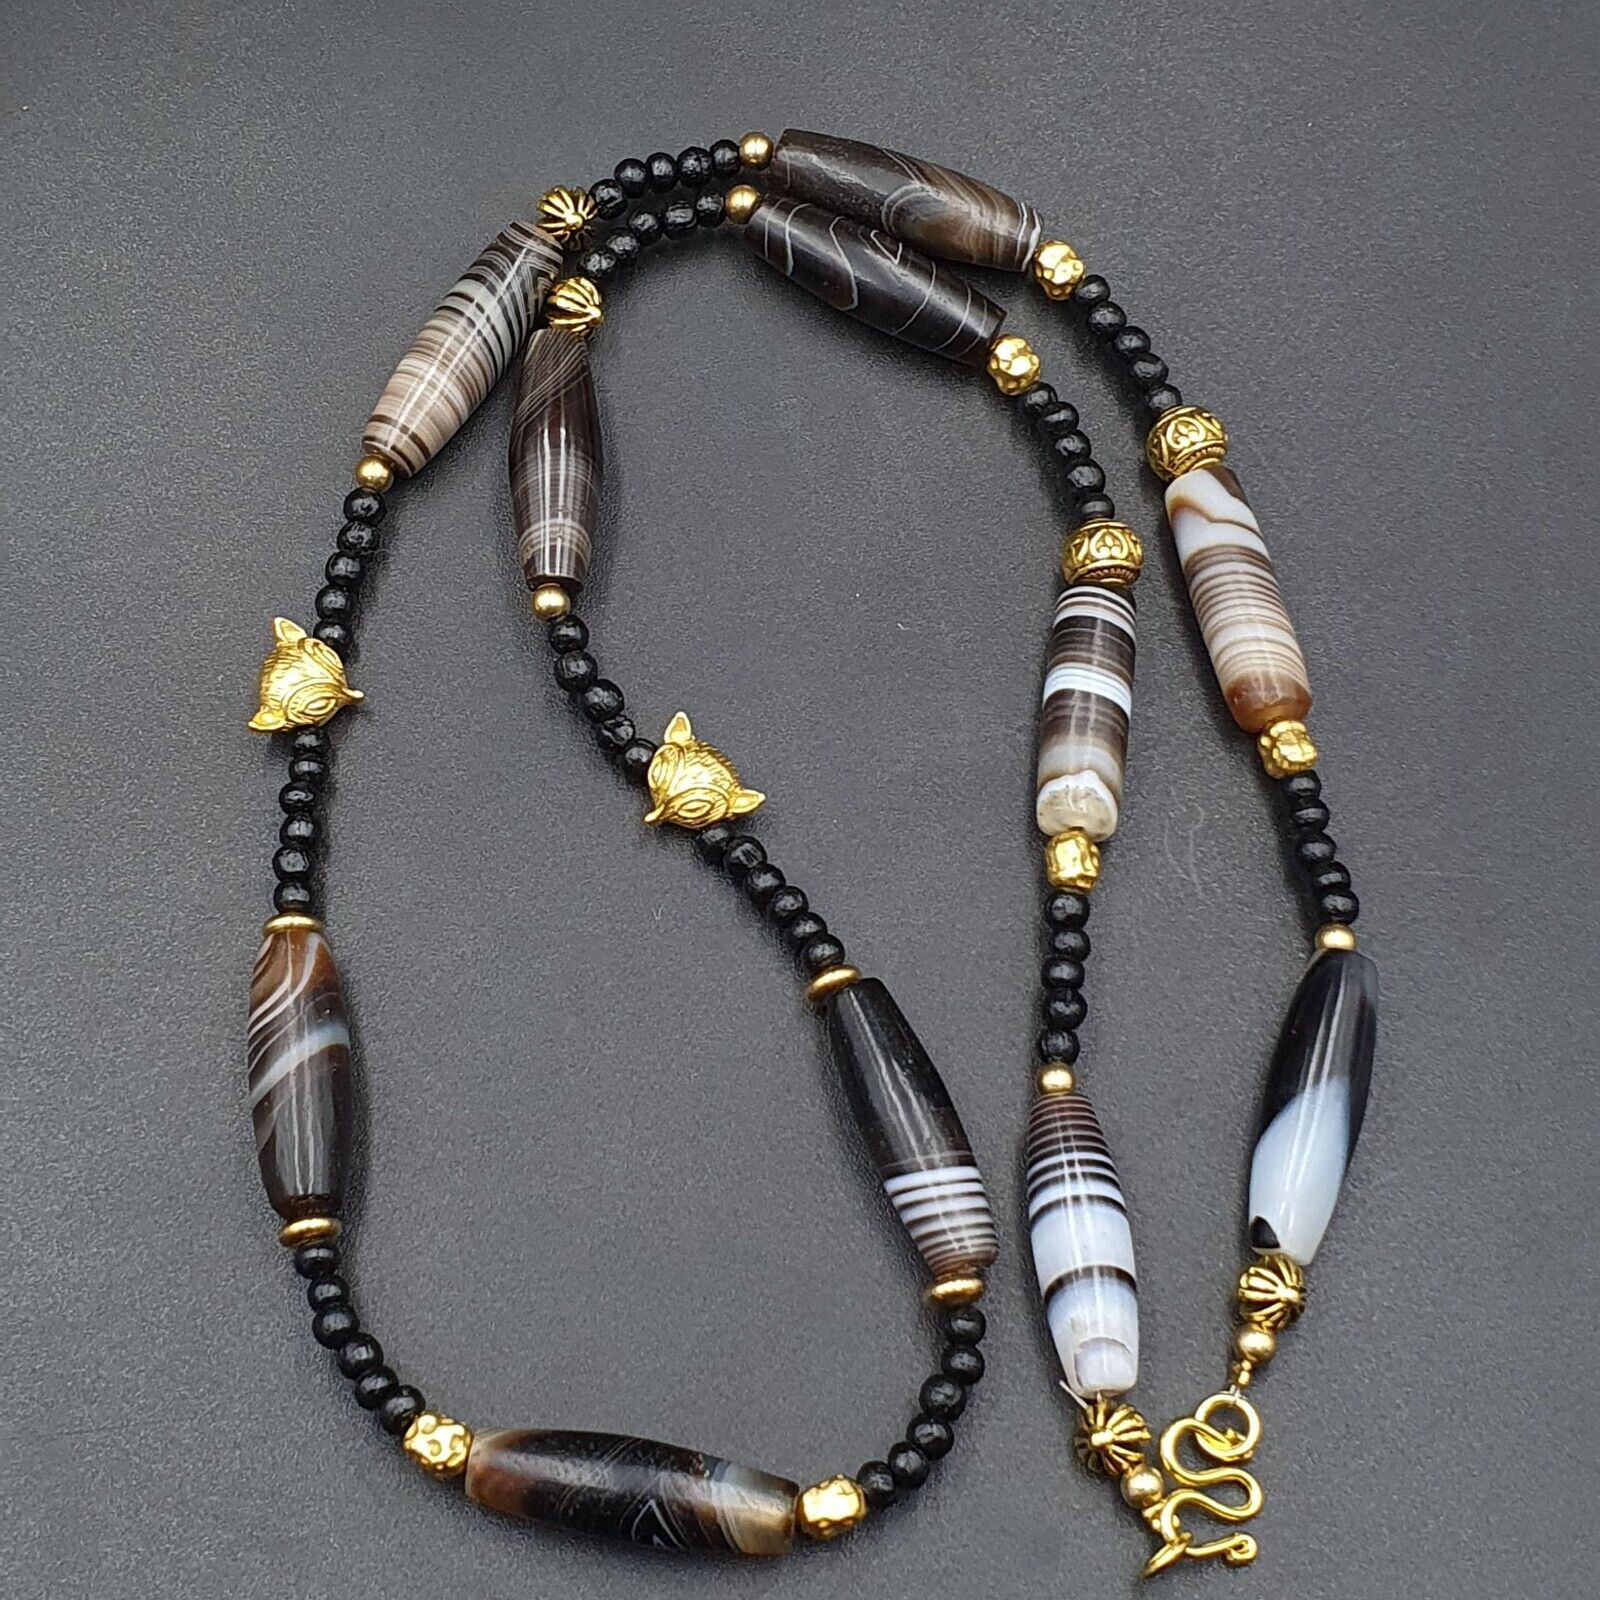 AA Antique Ancient Himalayan Agate rare Eyes Patterns Suleimani Agate Necklace